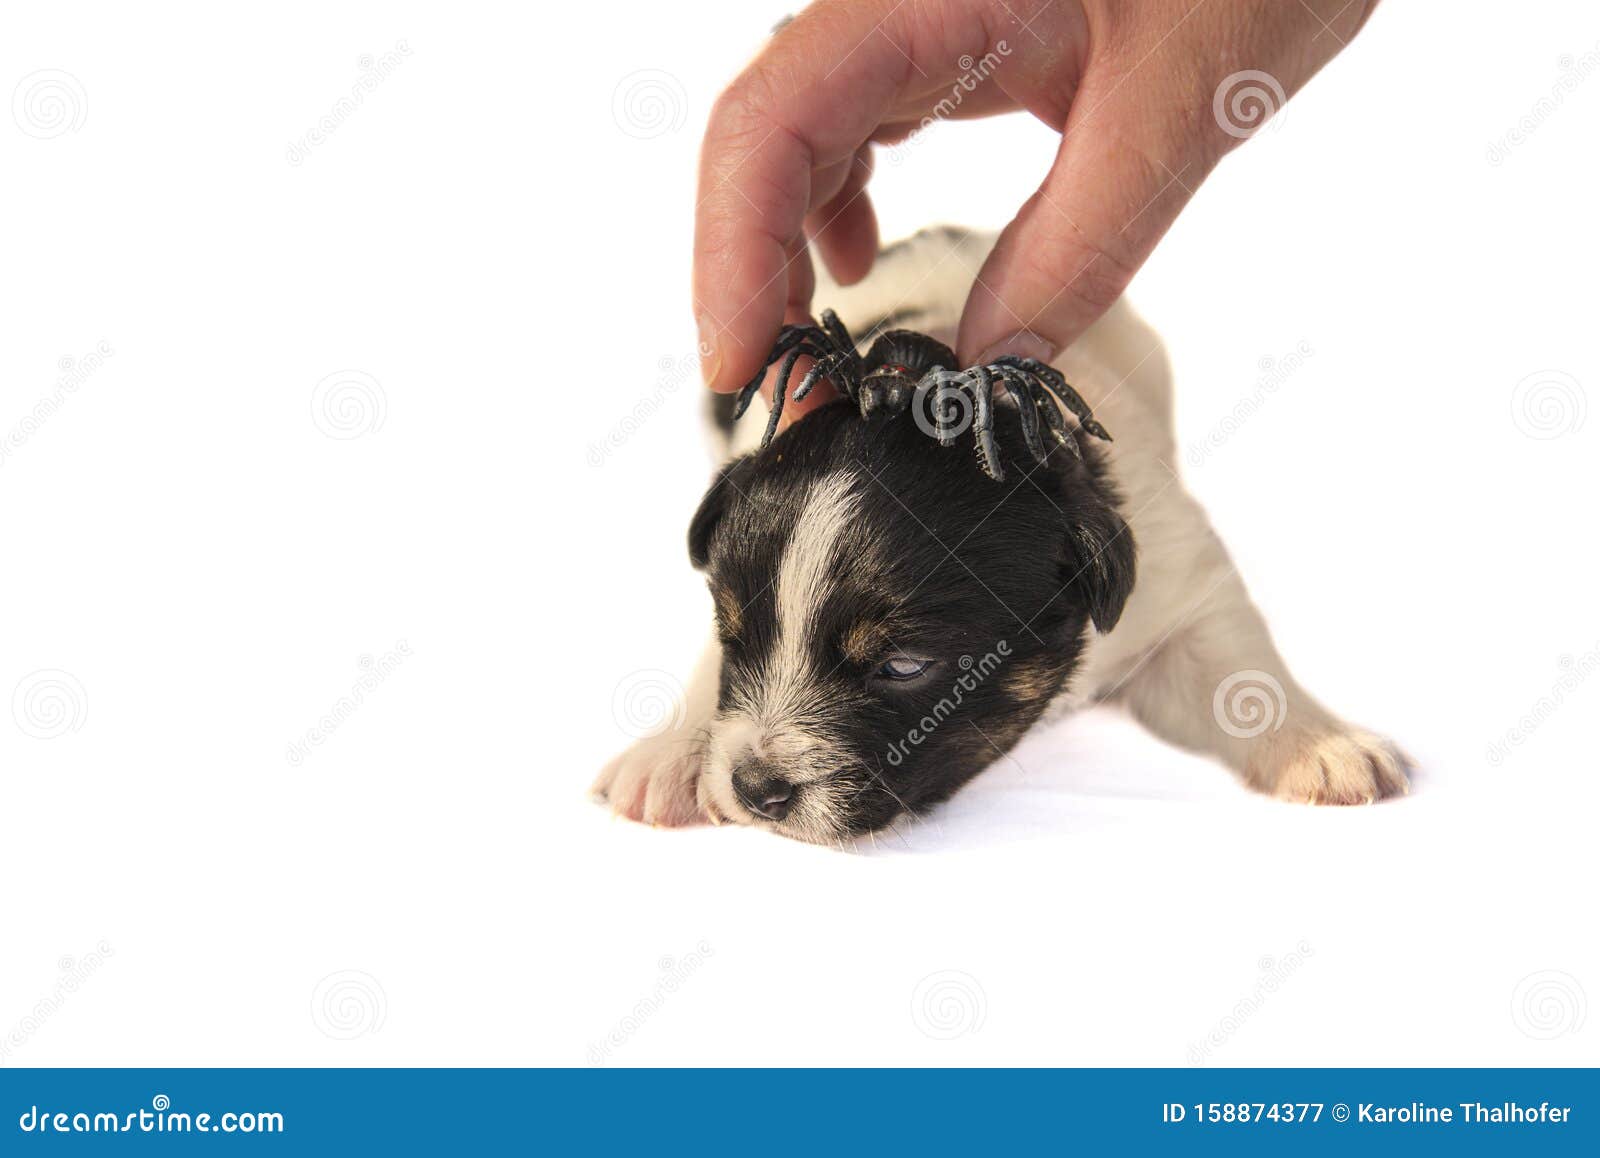 Spytte Tidlig Mistillid Cute Jack Russell Terrier Puppy Dog with Spider - Ready for Halloween Stock  Image - Image of child, fear: 158874377